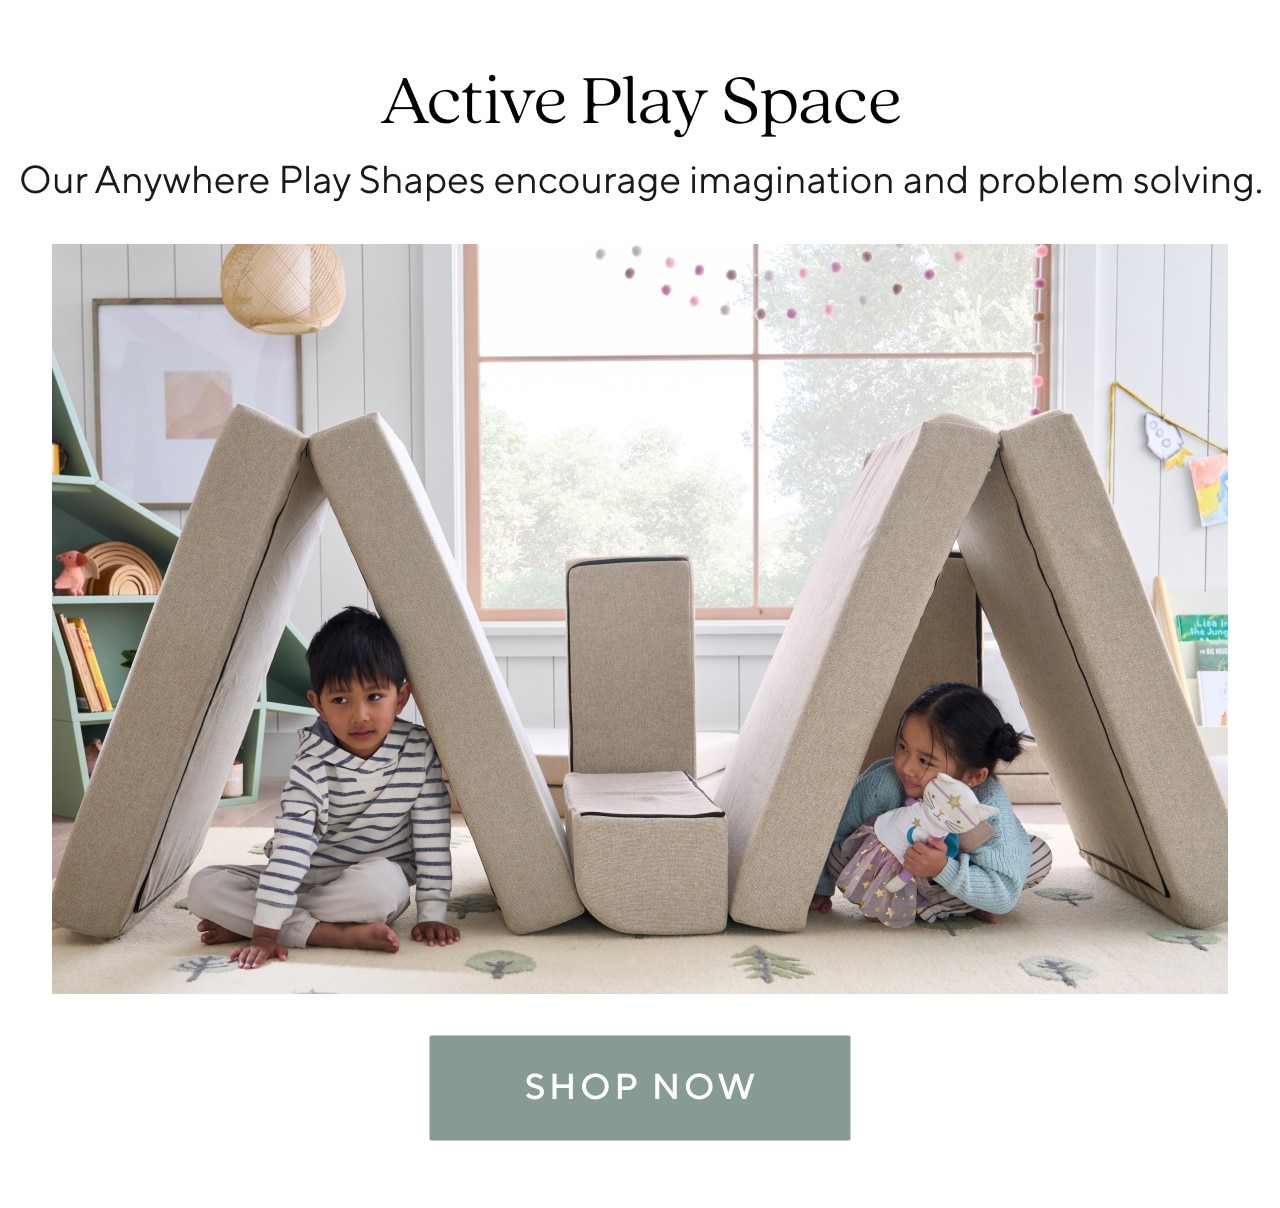 ACTIVE PLAY SPACE